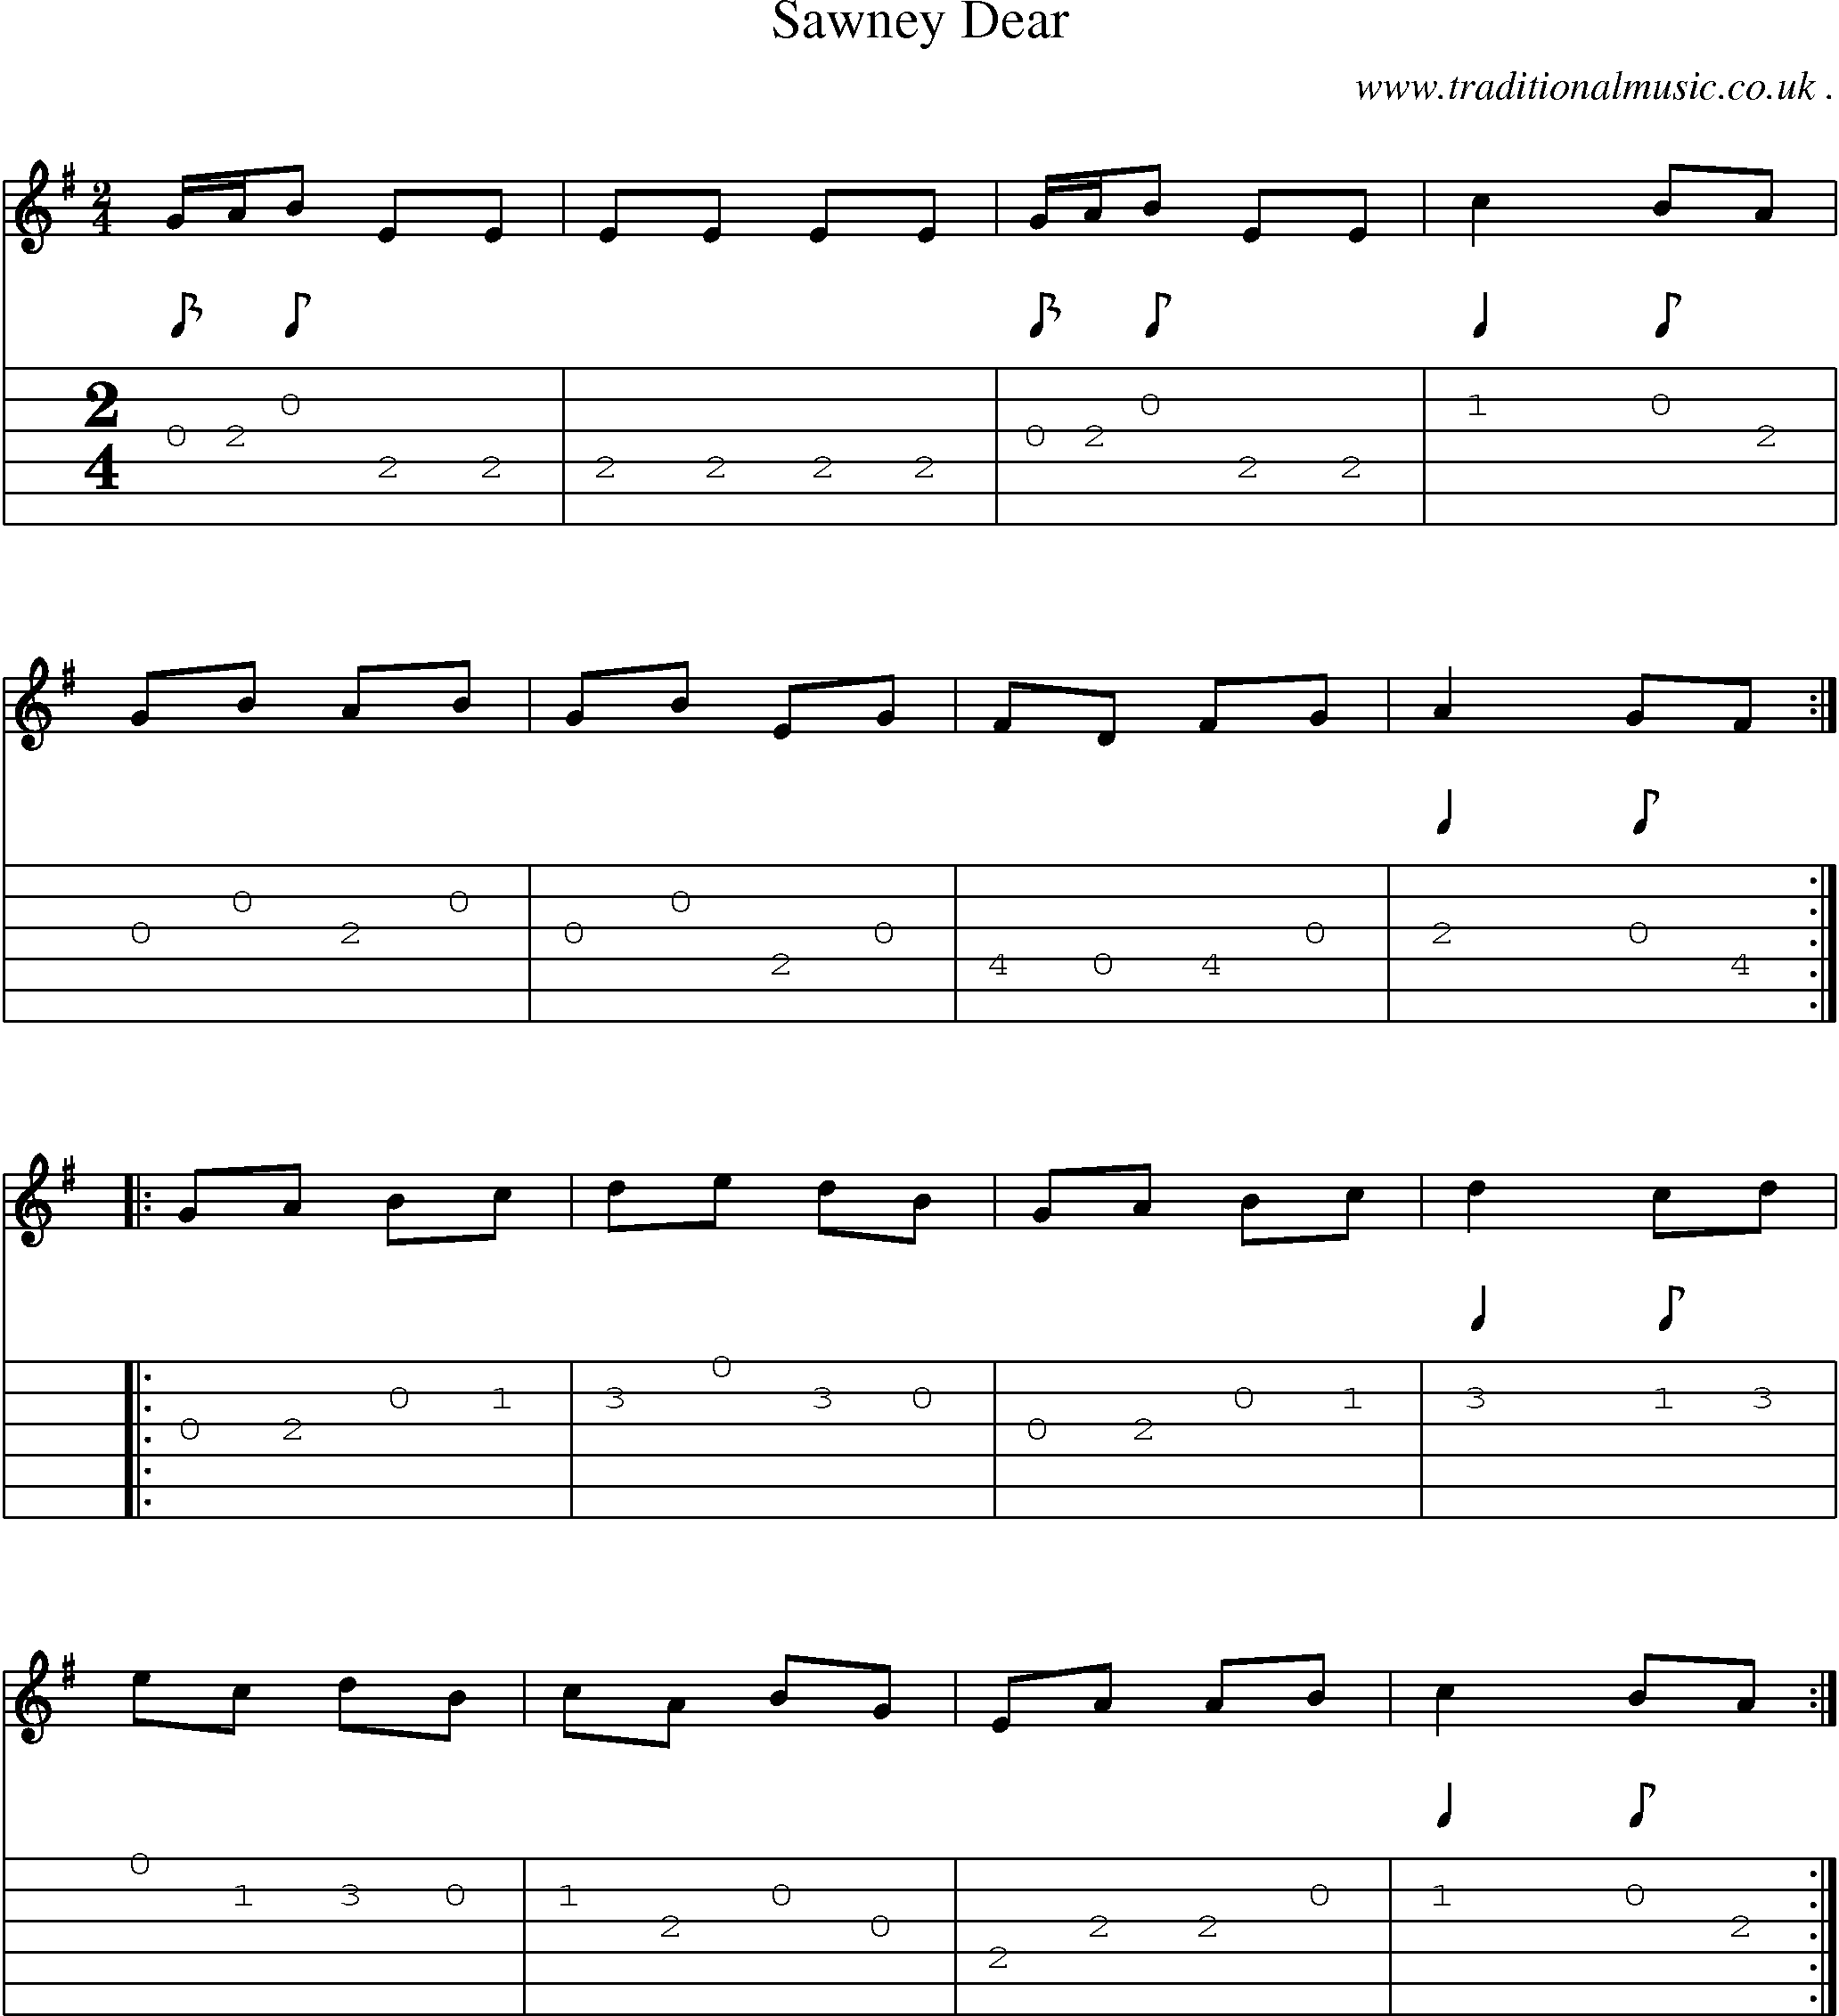 Sheet-Music and Guitar Tabs for Sawney Dear